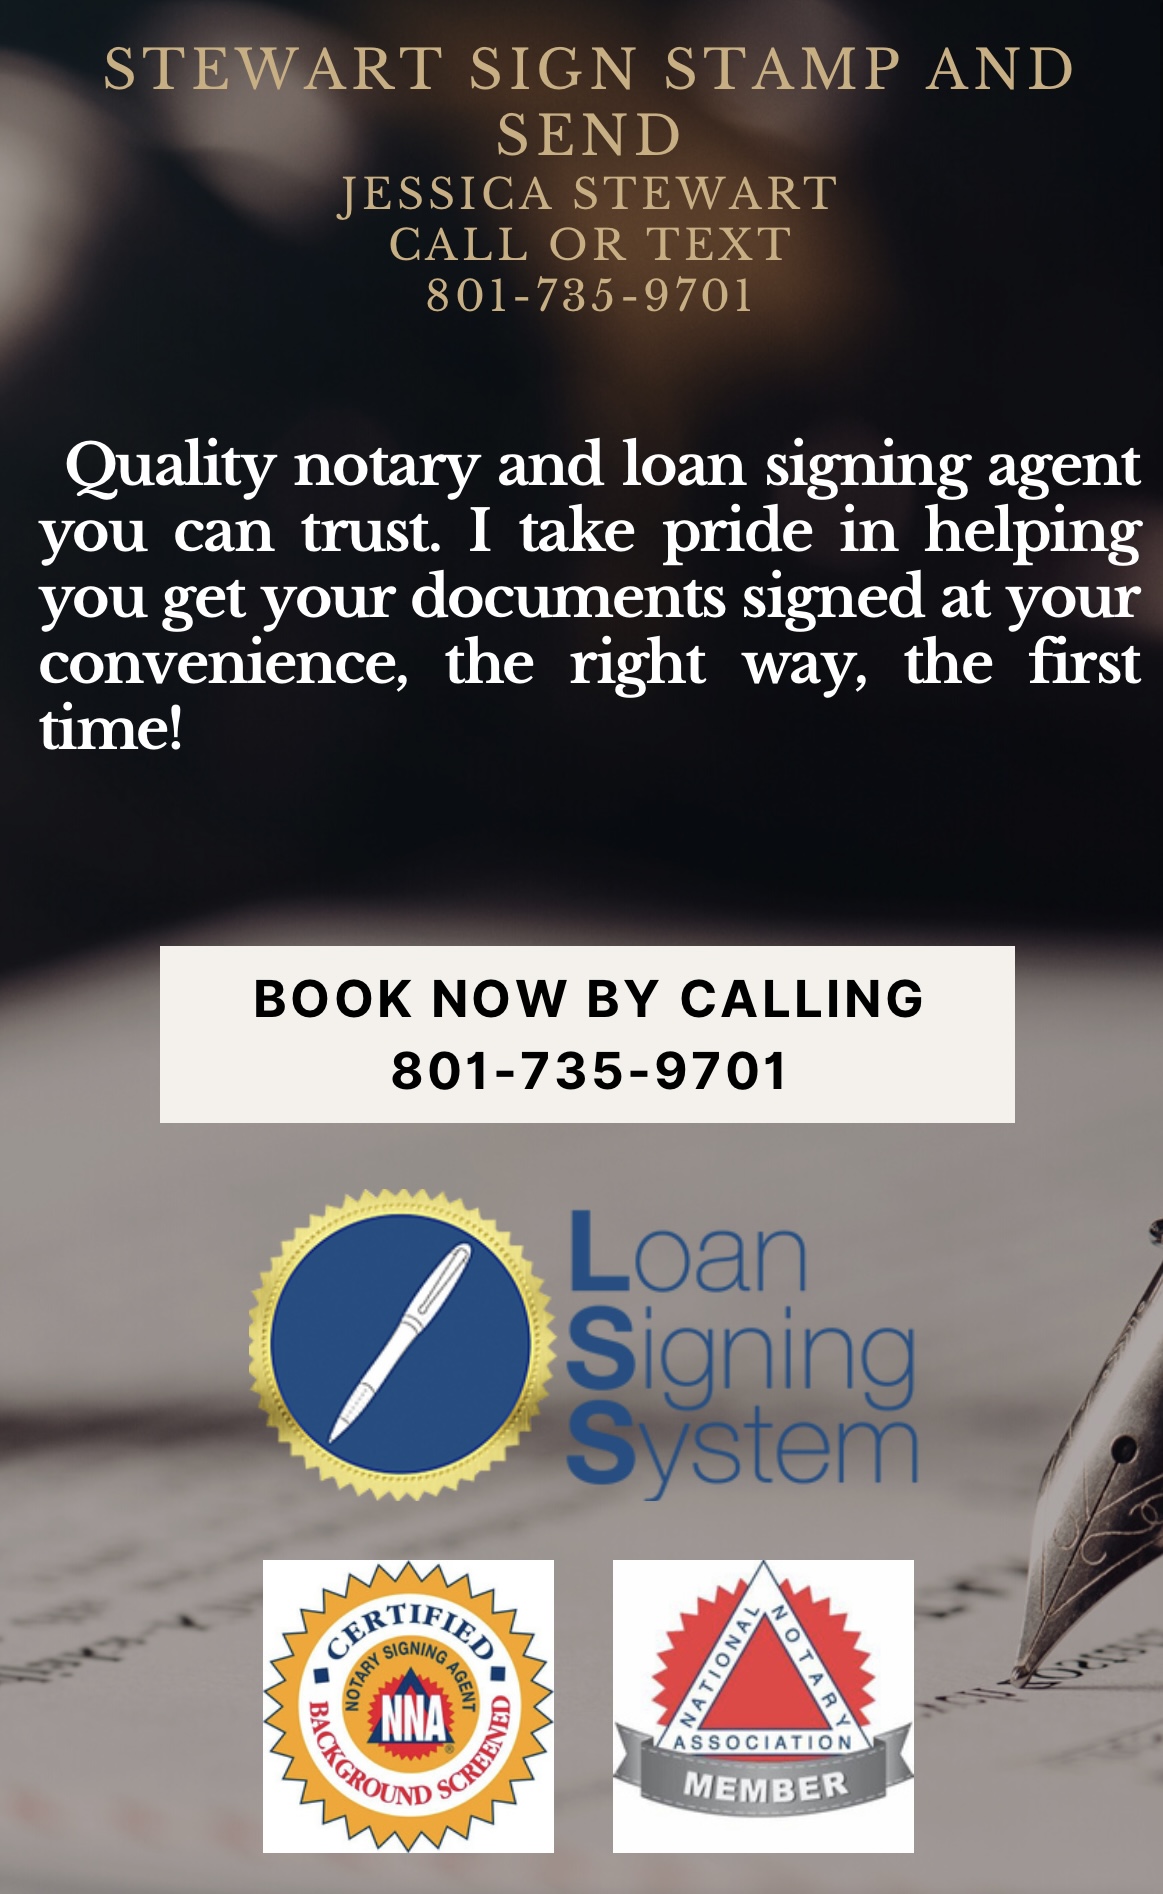 Stewart Mobile Notary and Loan Signing Services 620 Little Ave, Gridley California 95948